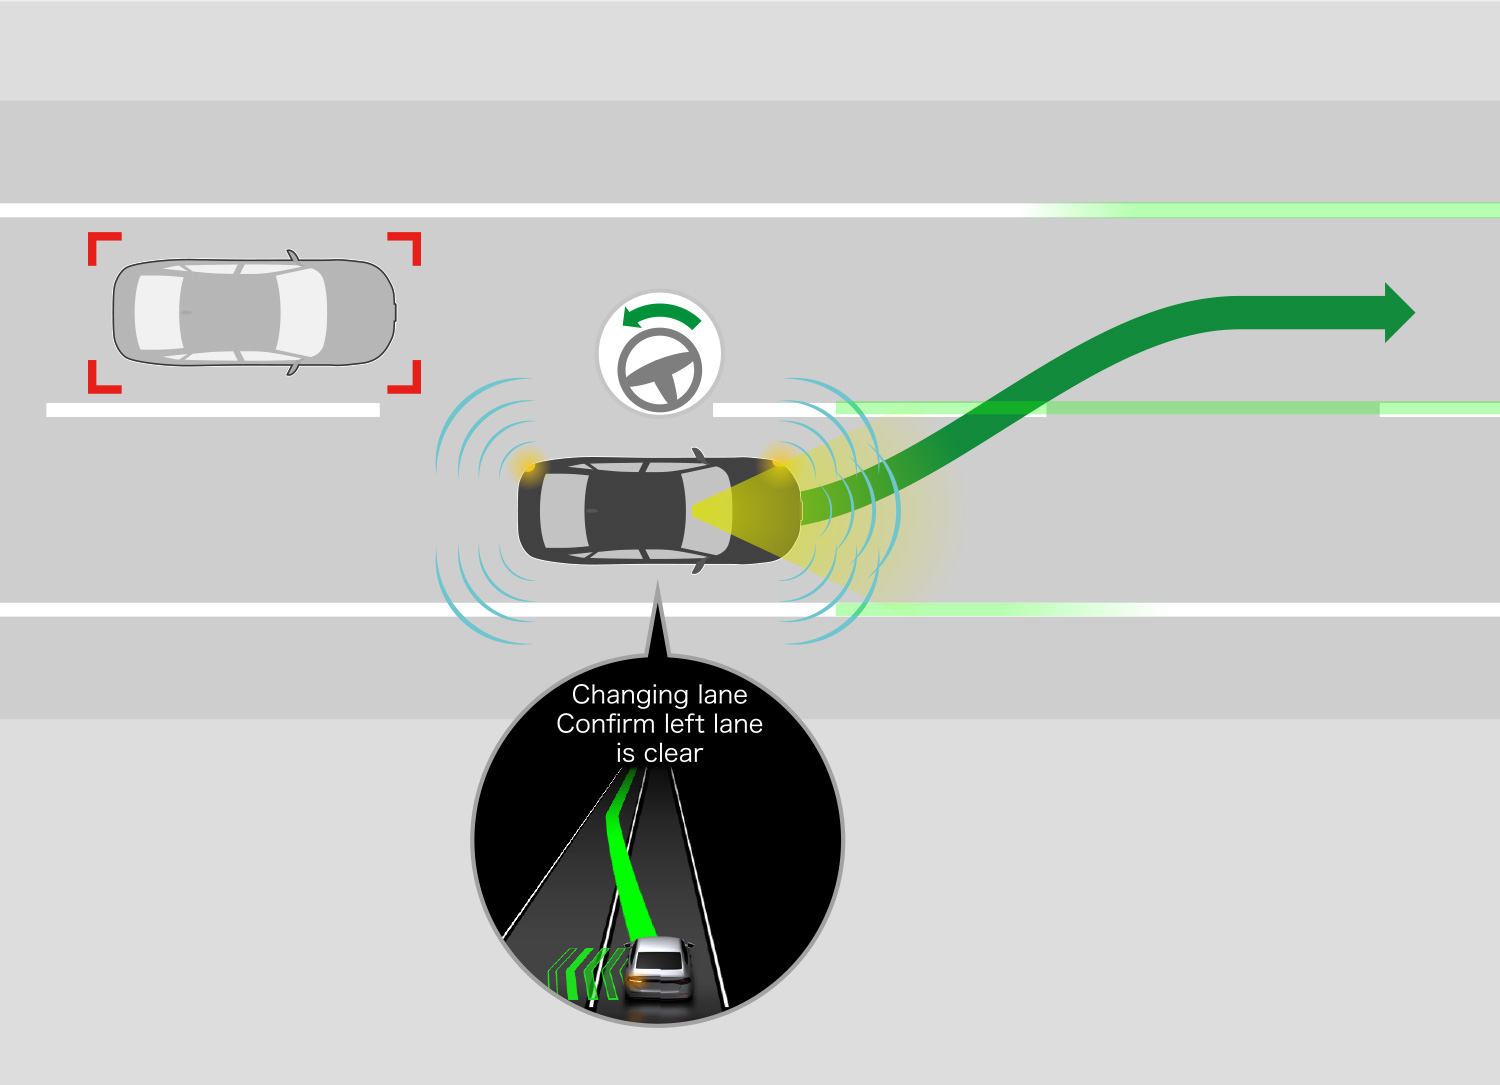 When the passing is complete and the driver presses the Active Lane Change Recommendation switch again, the system assists the driver with returning to the original lane.